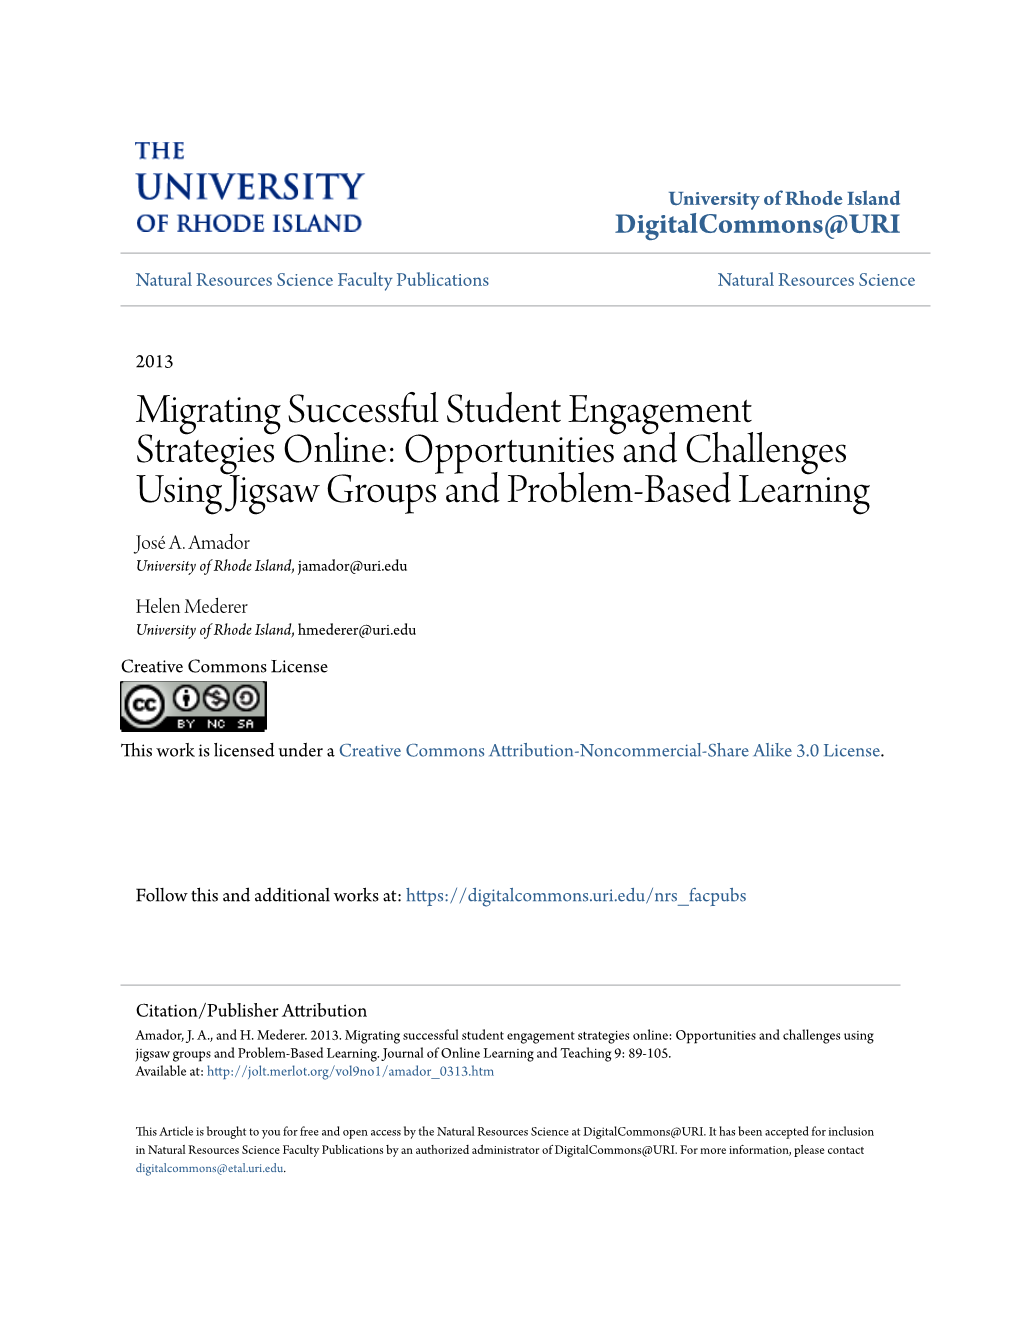 Migrating Successful Student Engagement Strategies Online: Opportunities and Challenges Using Jigsaw Groups and Problem-Based Learning José A